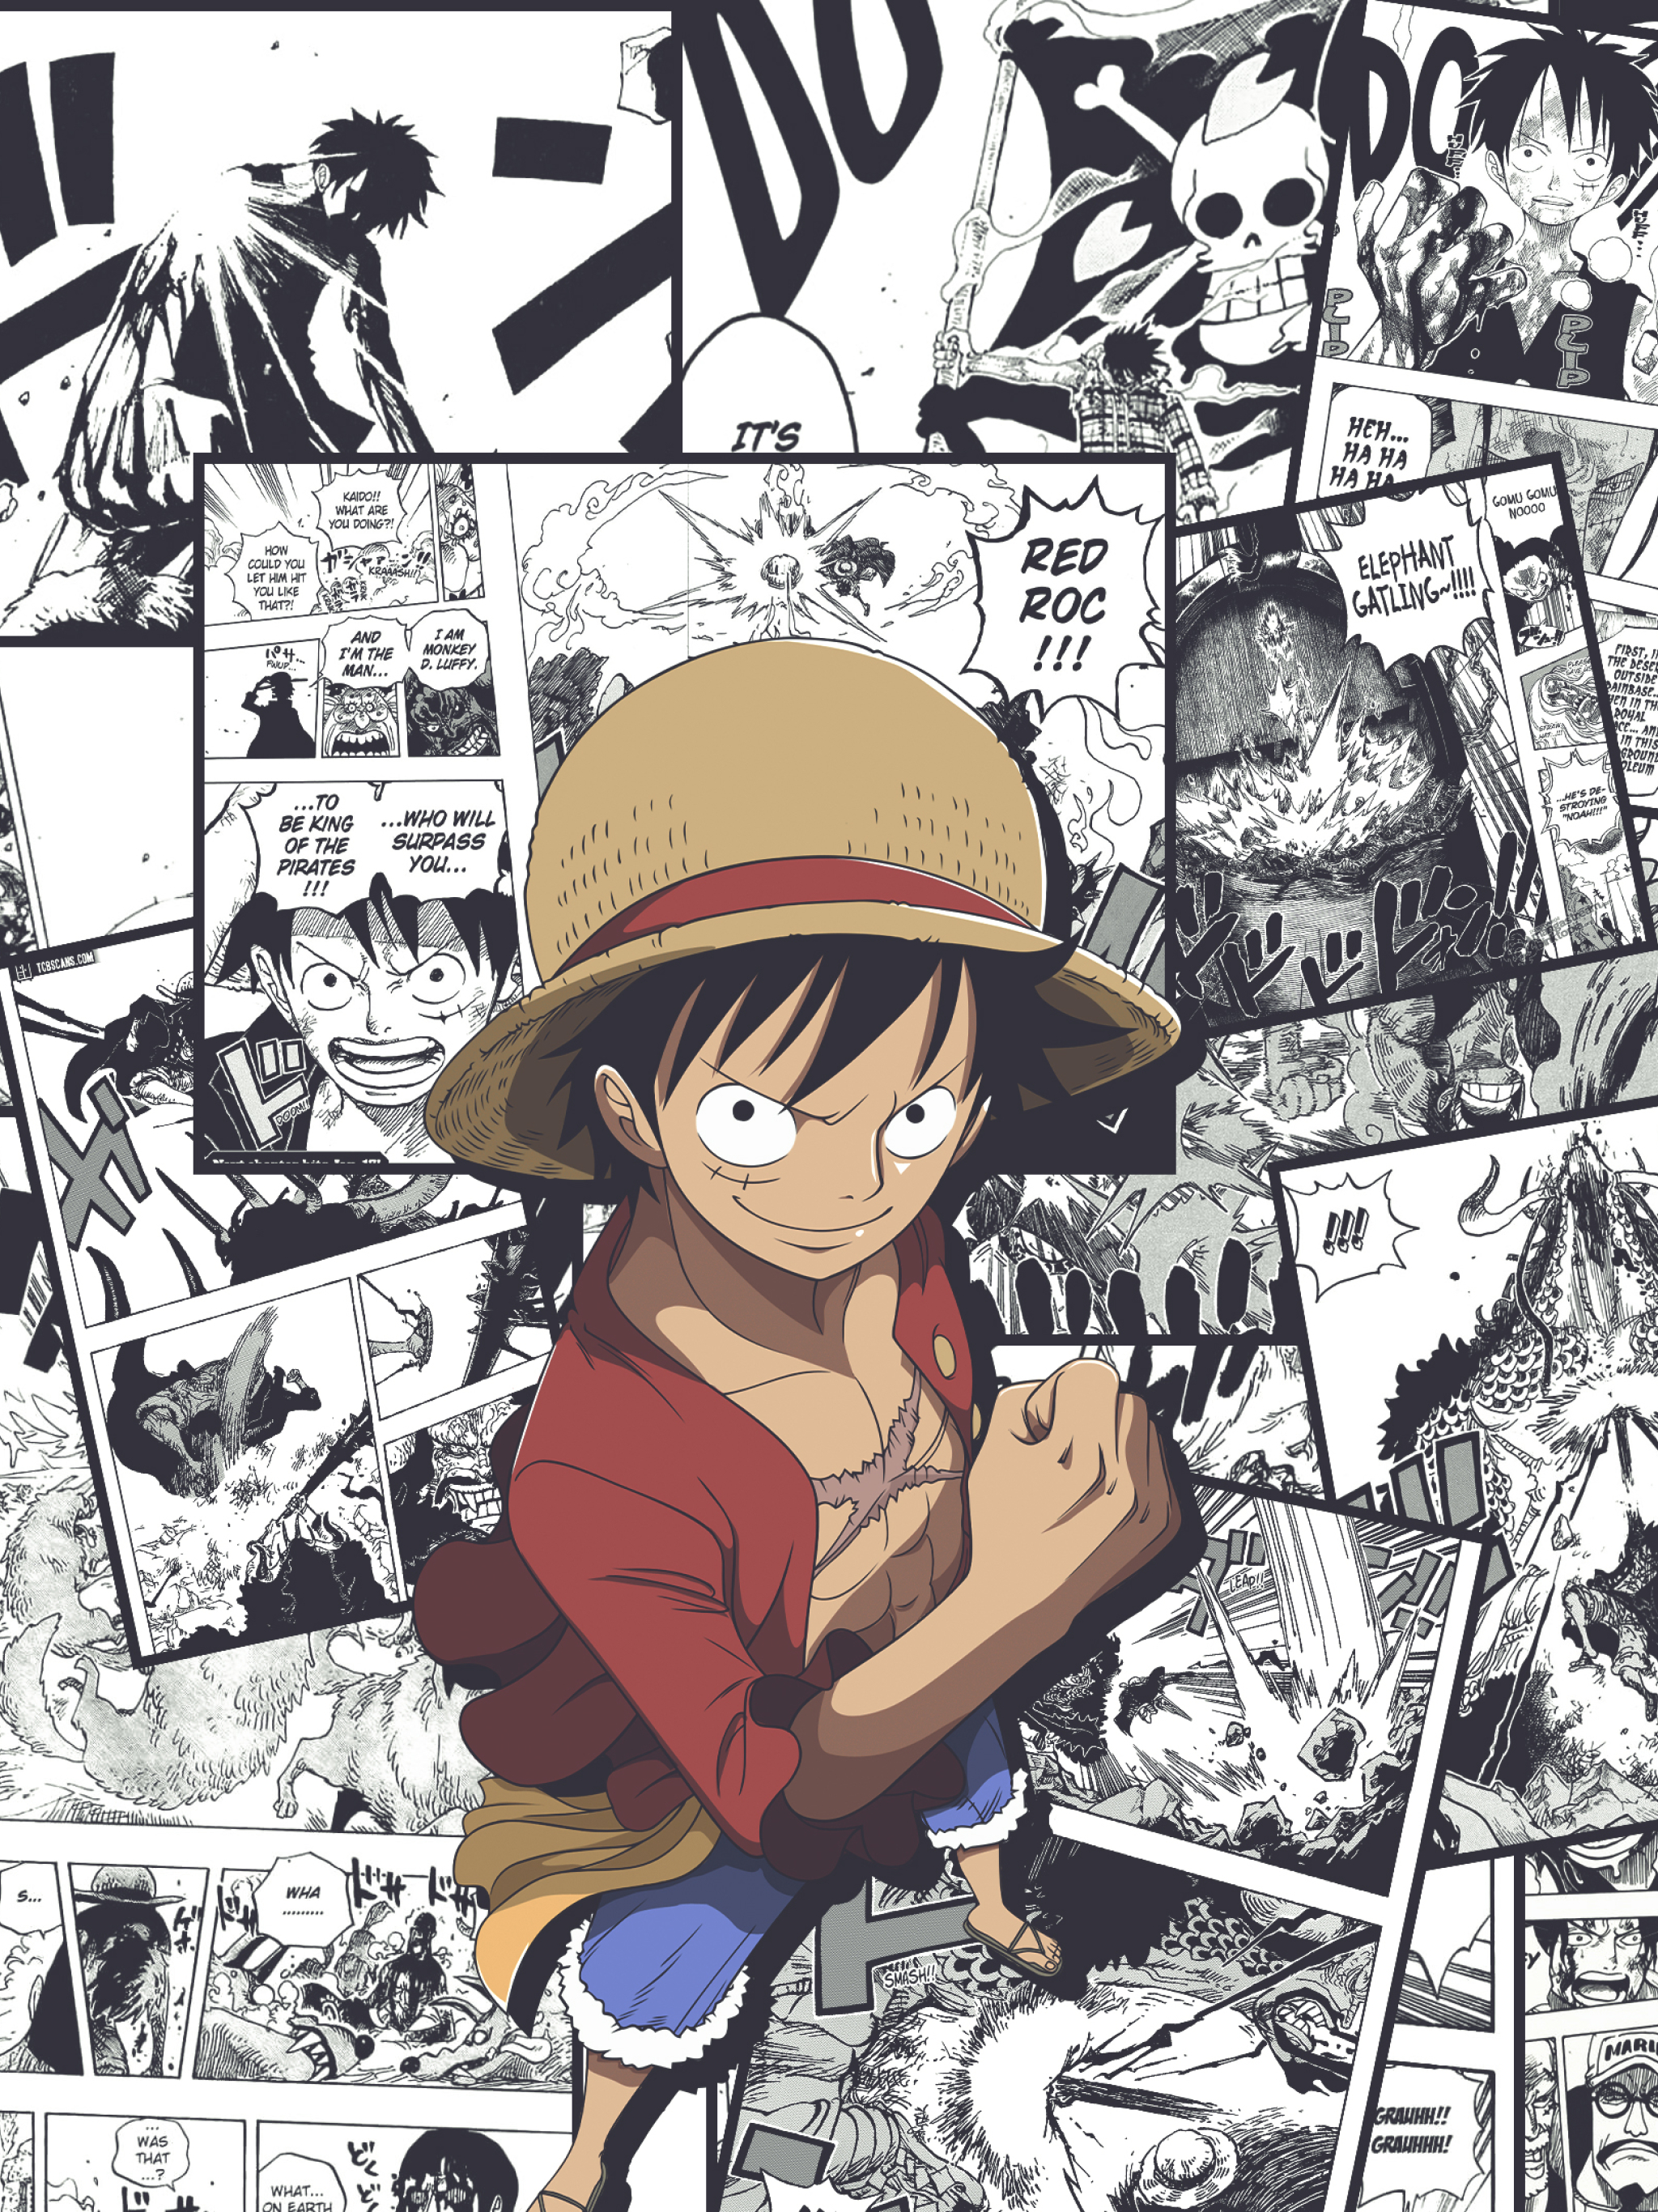 Wallpaper ID 359720  Anime One Piece Phone Wallpaper Monkey D Luffy  1080x2340 free download